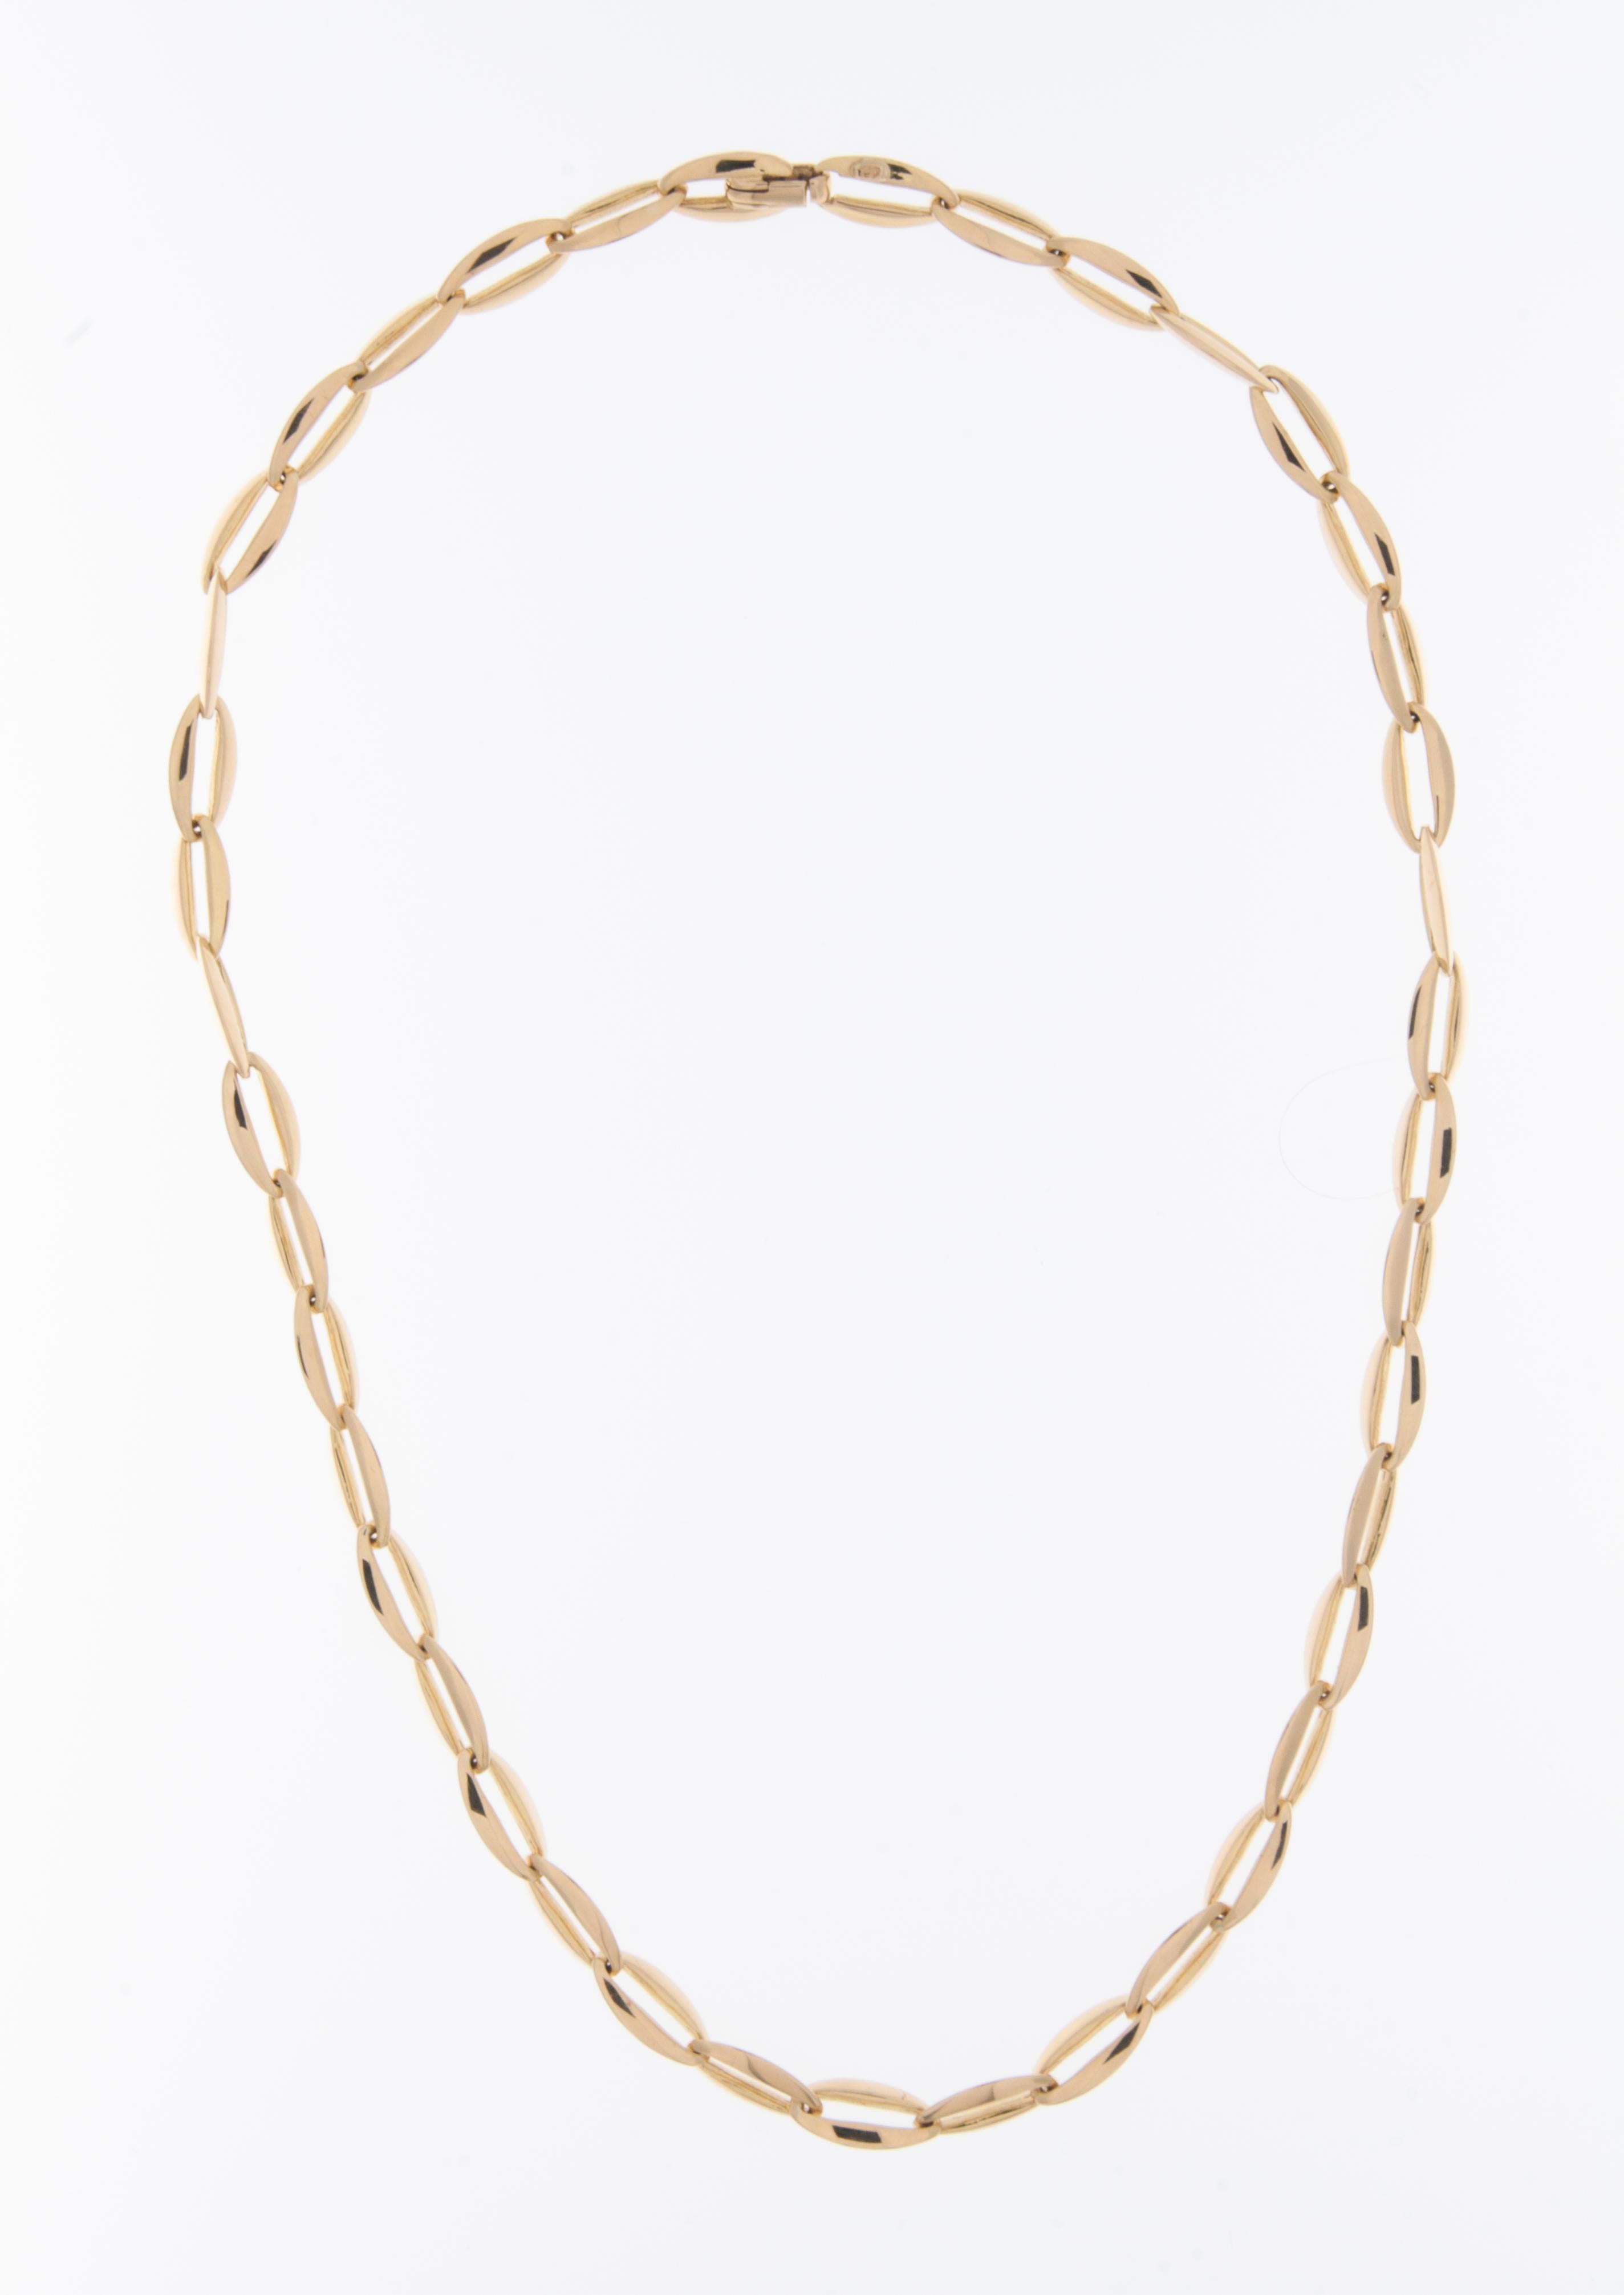 This Modern Italian 18kt Yellow Gold Necklace is a bold and contemporary piece that effortlessly combines luxury with a sleek design. The necklace features large links crafted from high-quality 18kt yellow gold, adding a touch of opulence to the